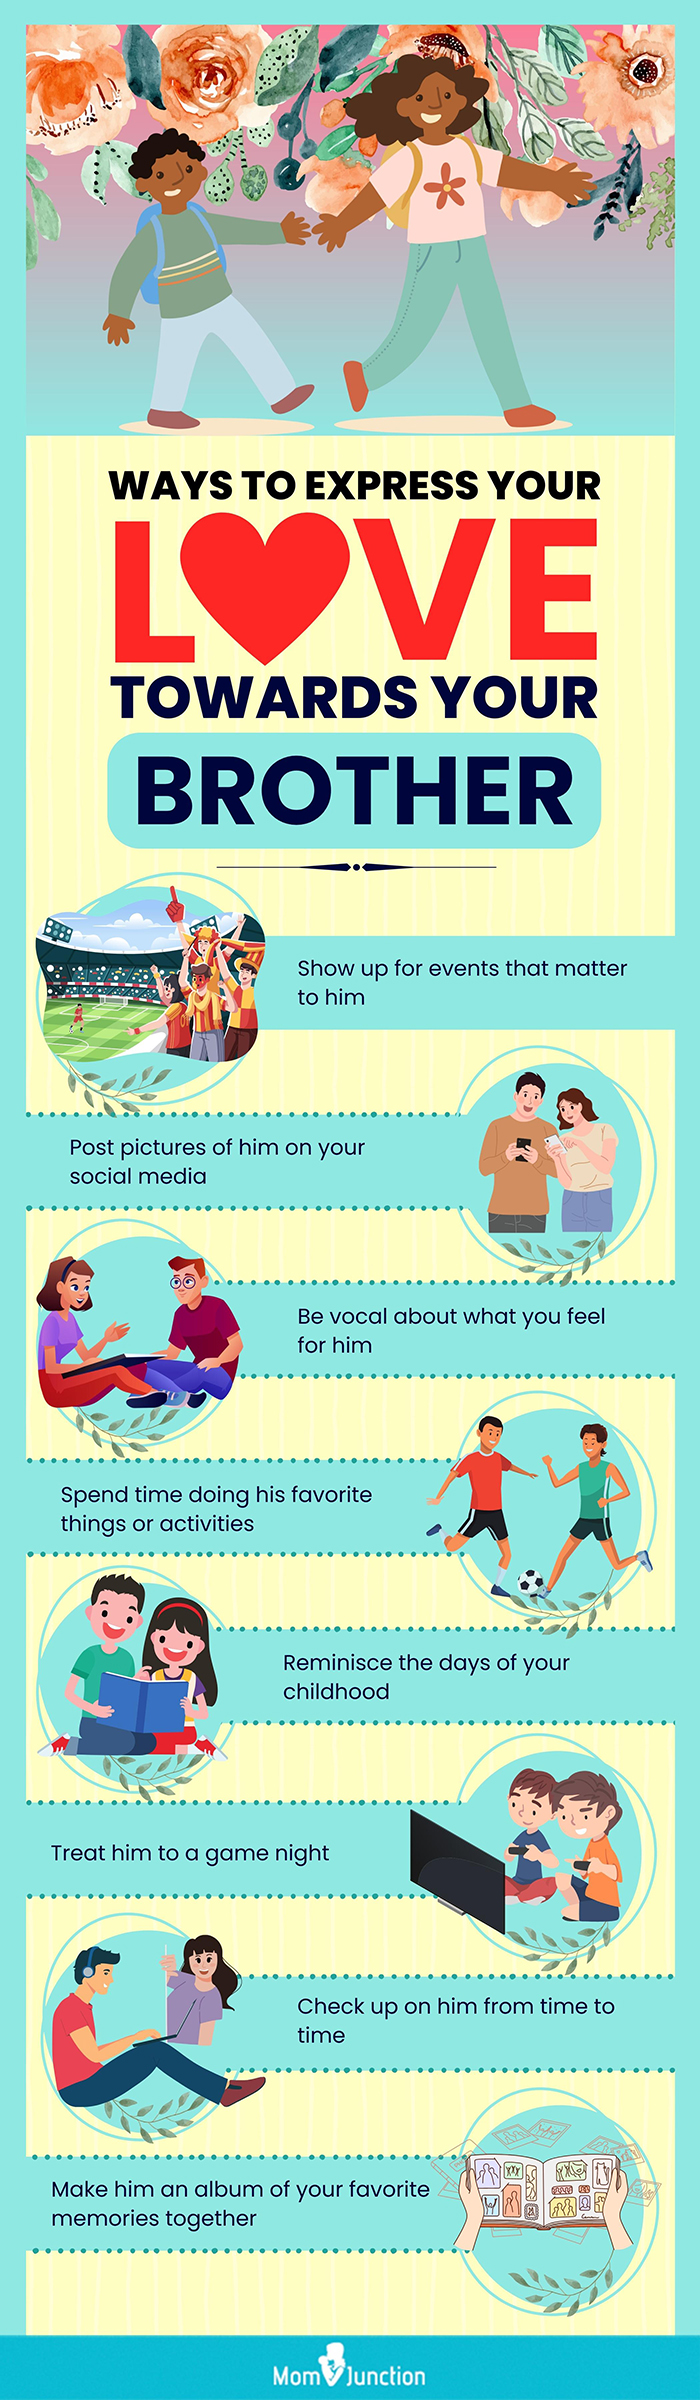 ways to express your love towards your brother (infographic)